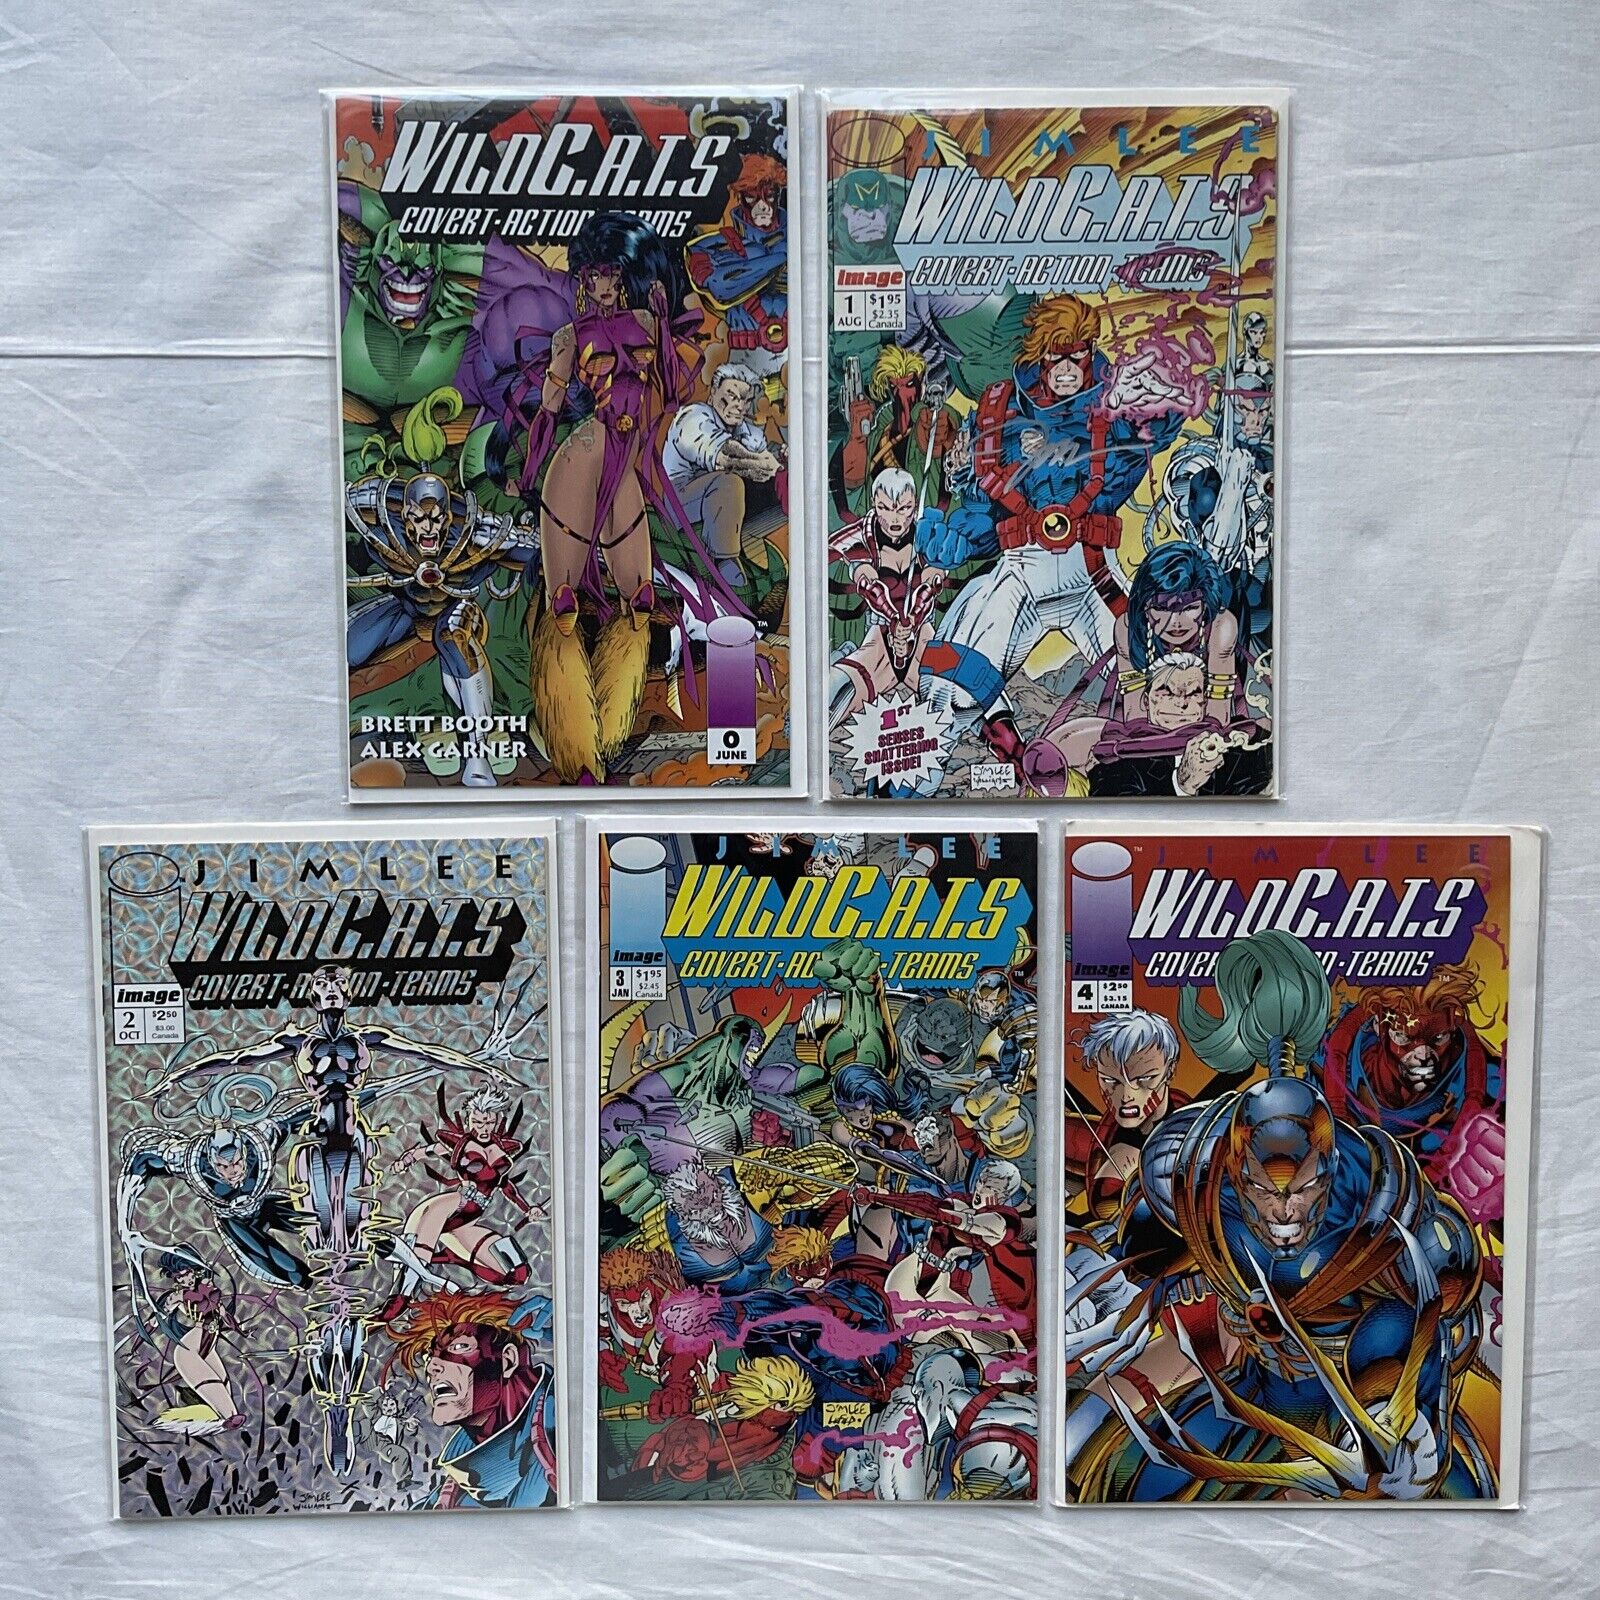 Image WildC.A.T.S Covert Action Team #0-4 Vol. 1 Lot of 5 #1 Signed by Jim Lee